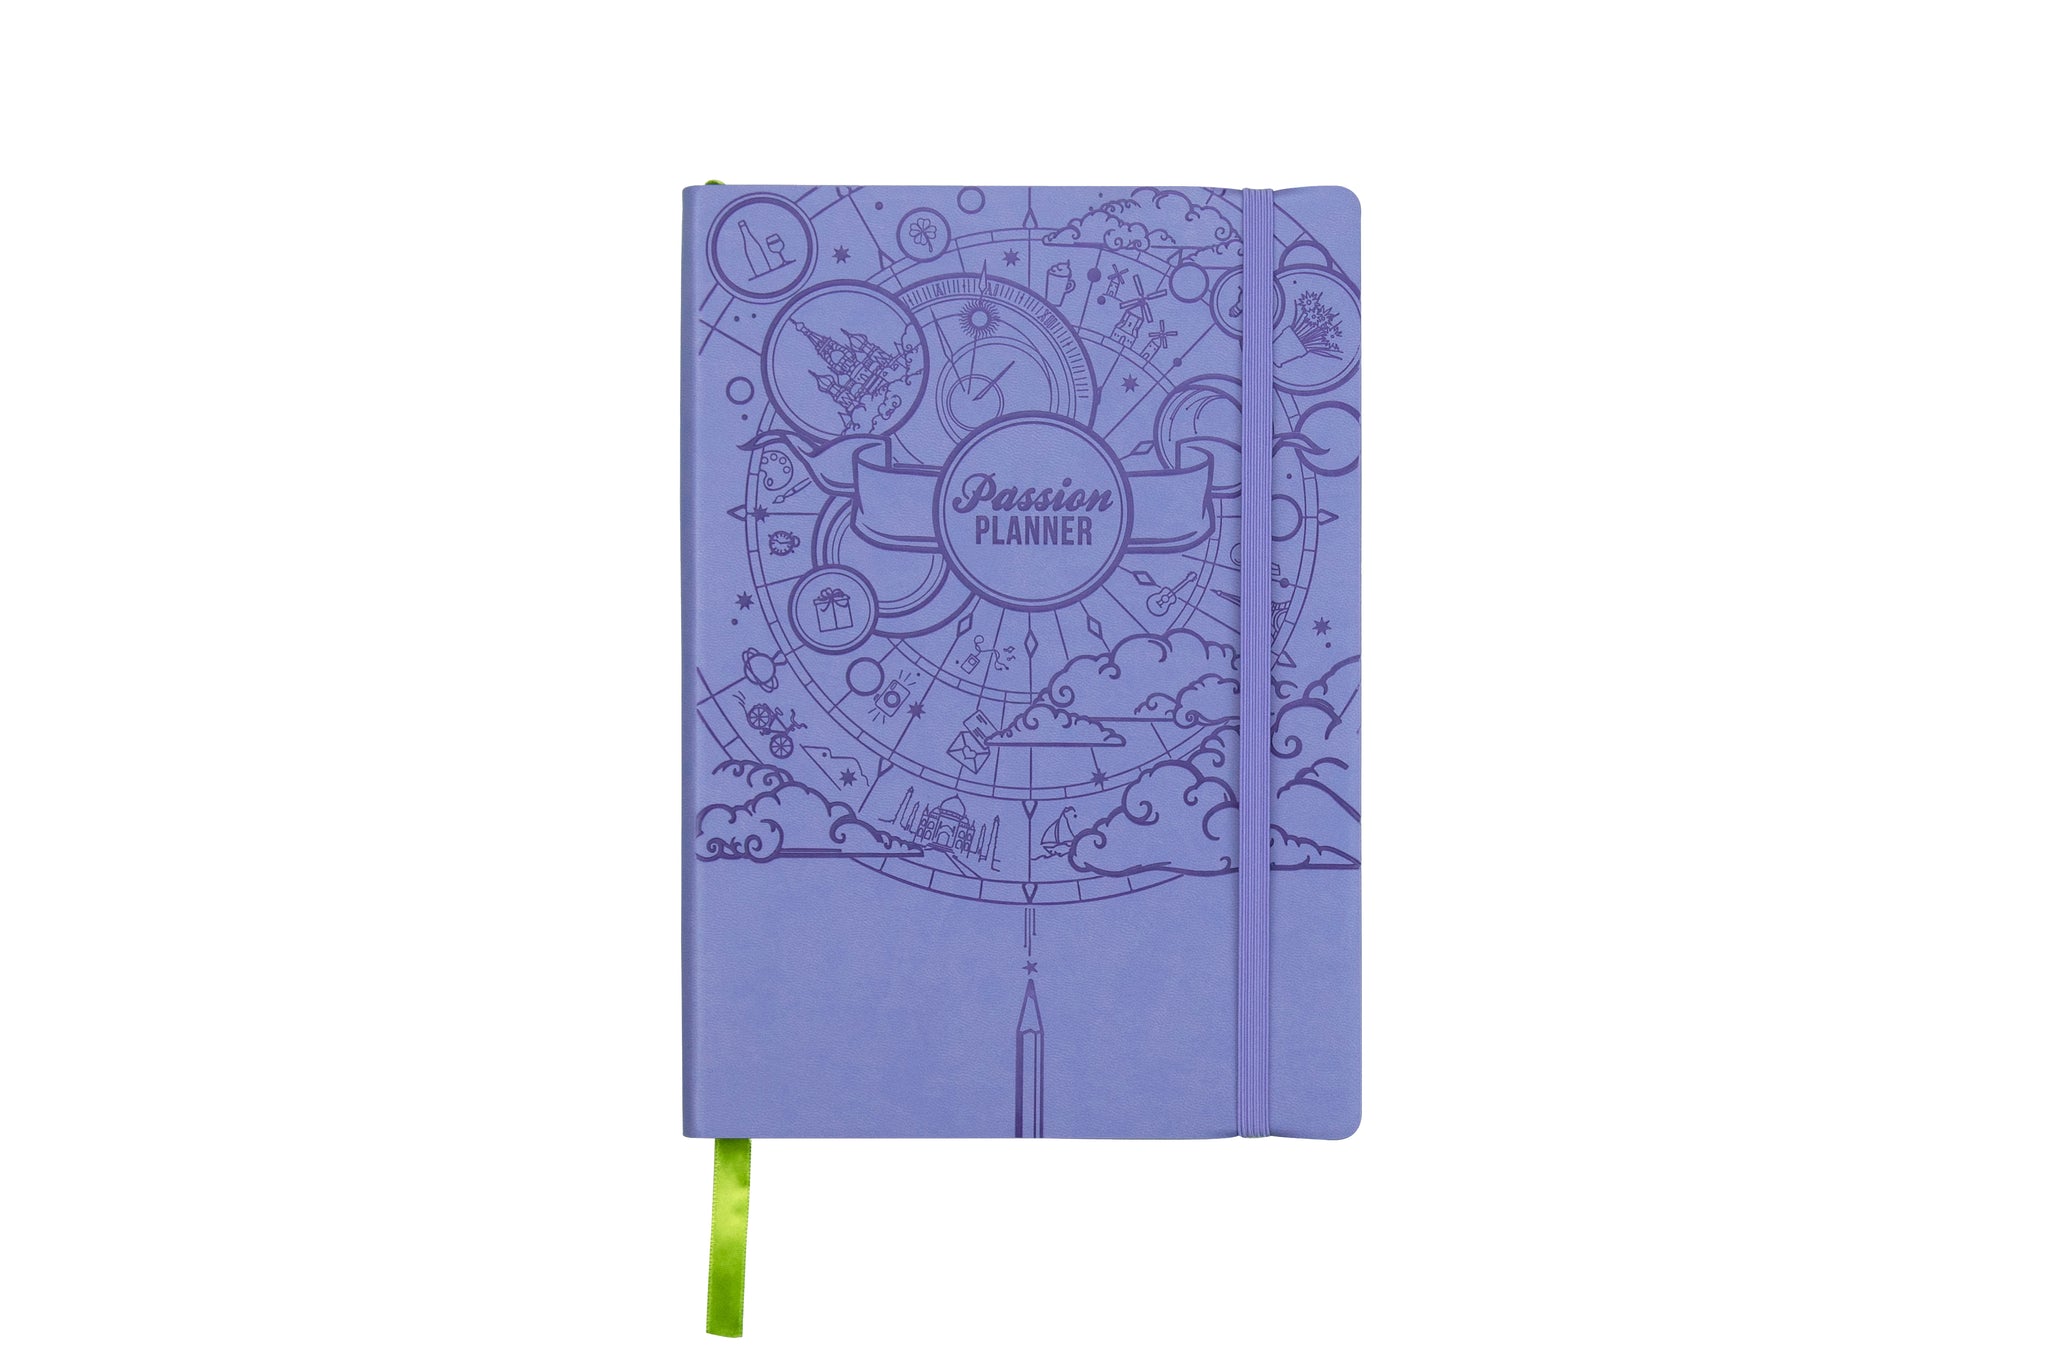 Passion Planner in Cosmic Purple with Proceeds to The Cosmos